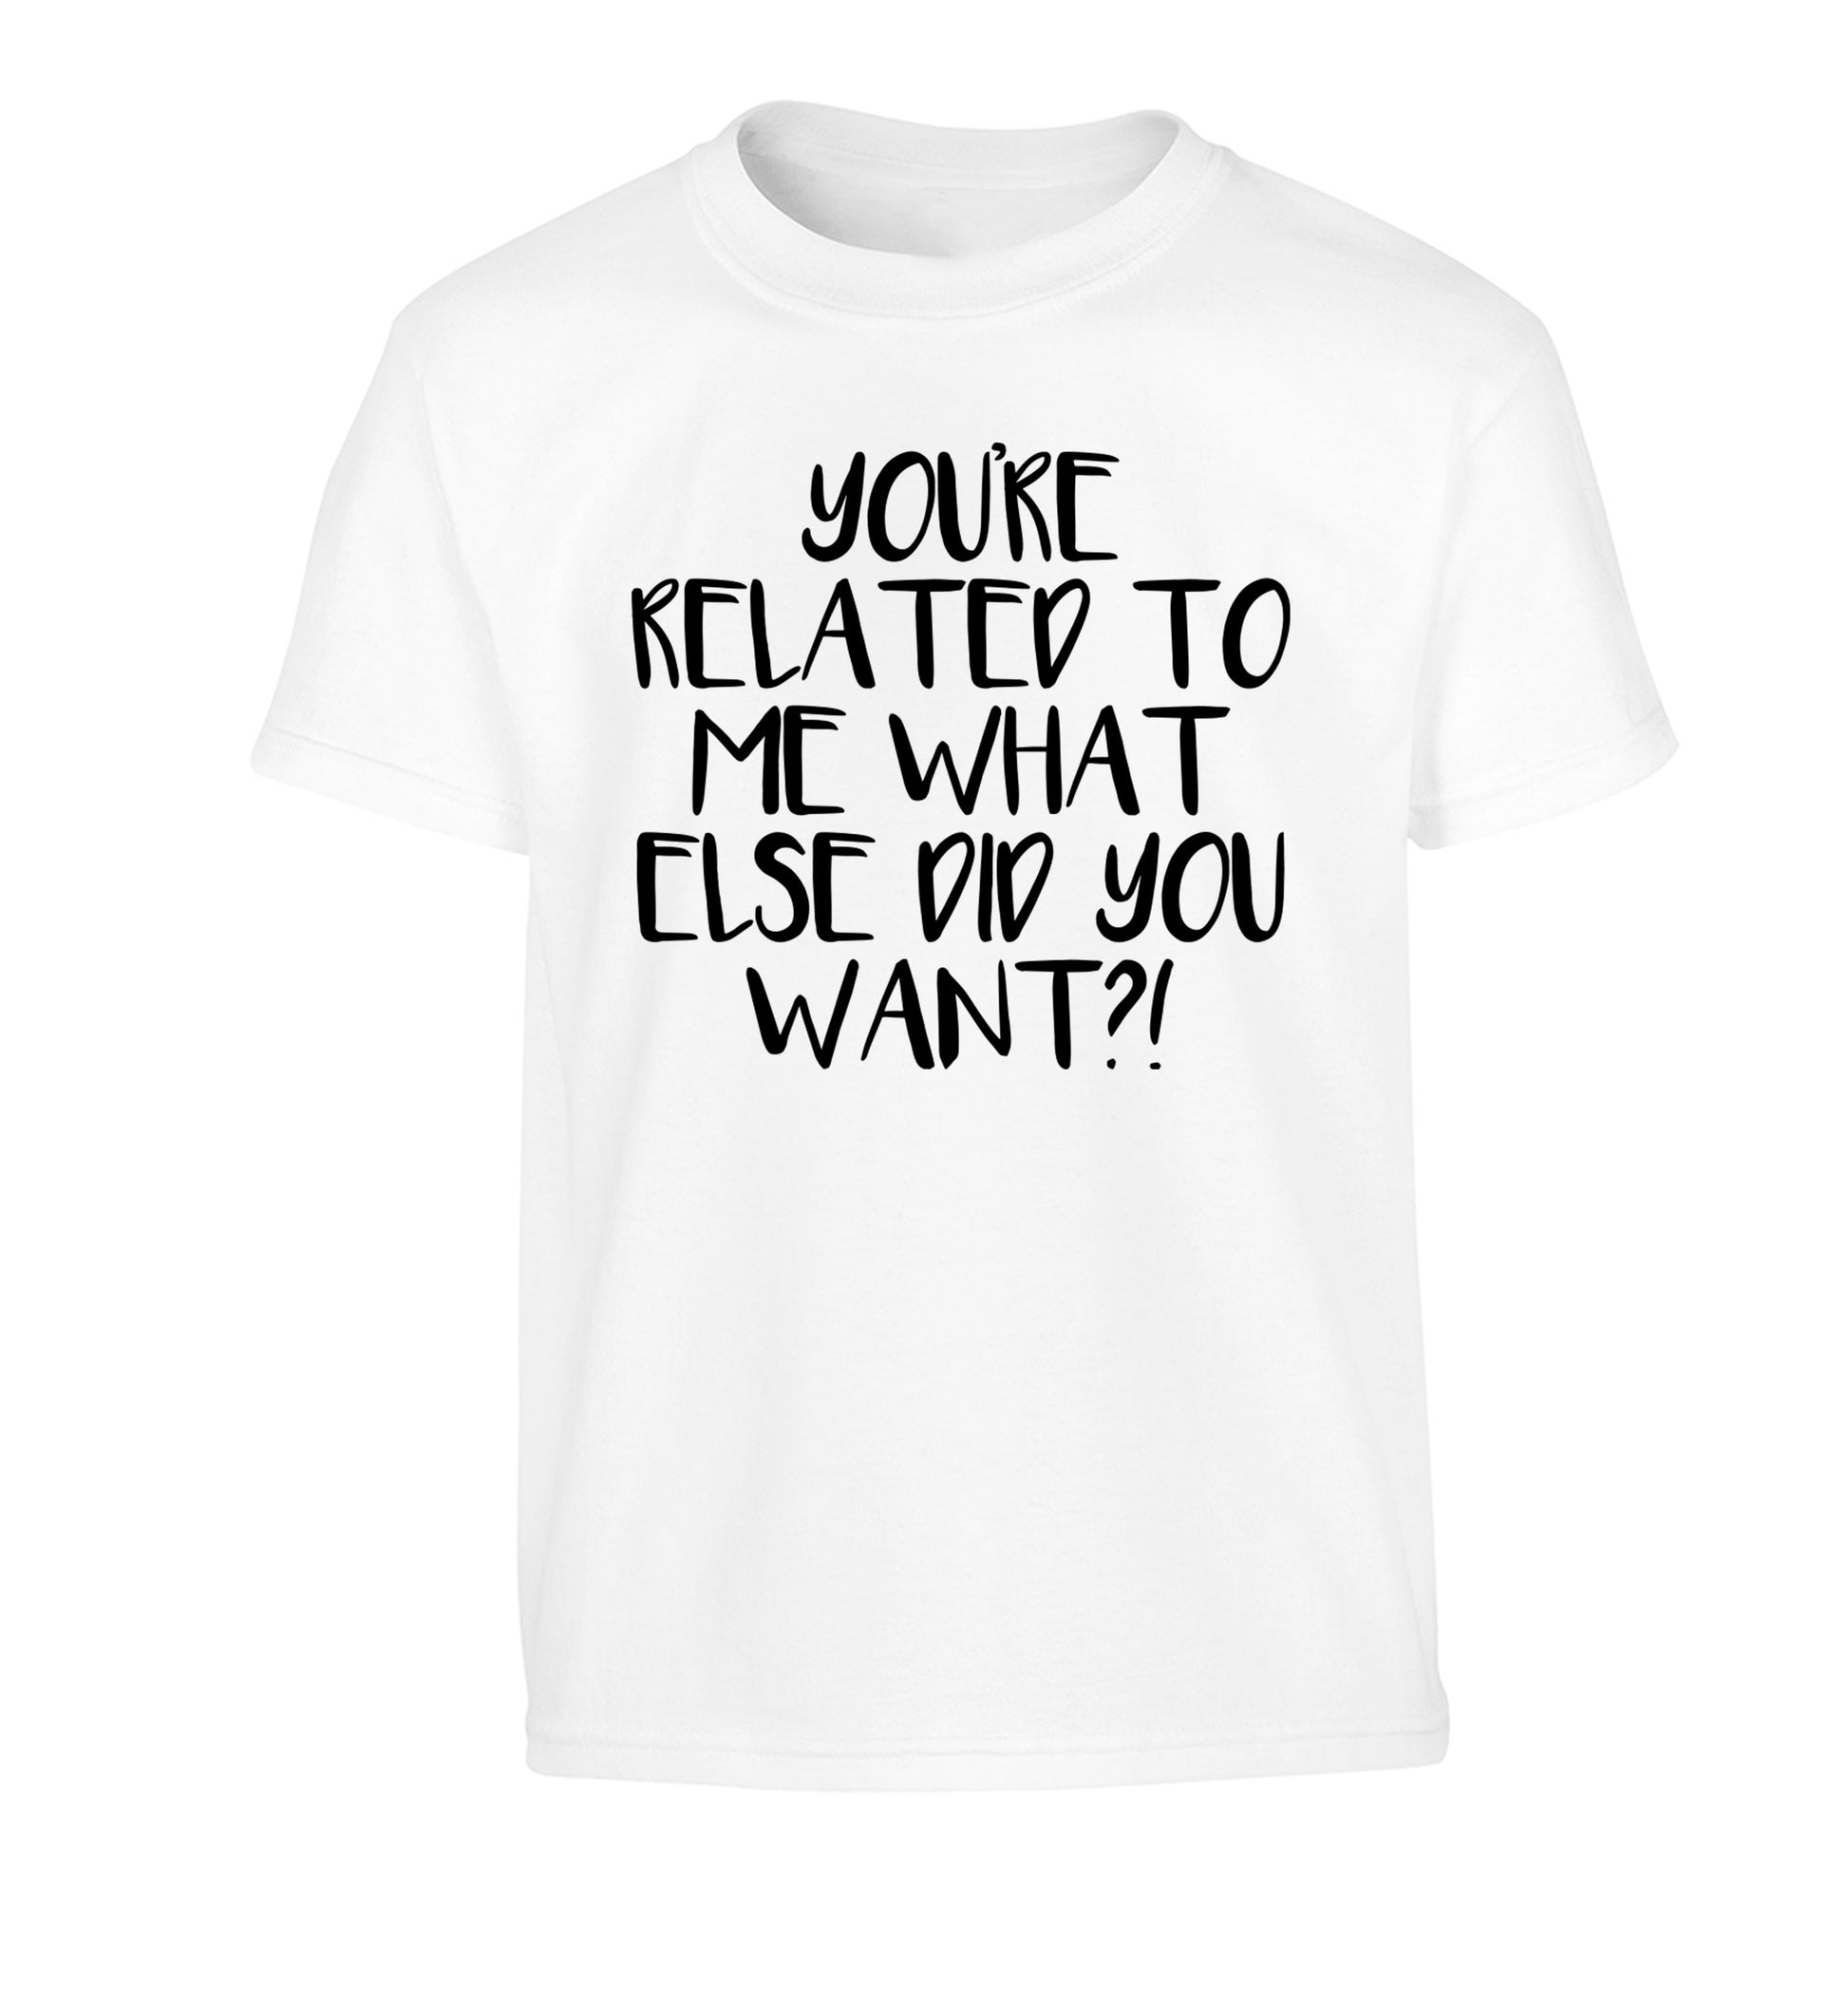 You're related to me what more do you want? Children's white Tshirt 12-13 Years